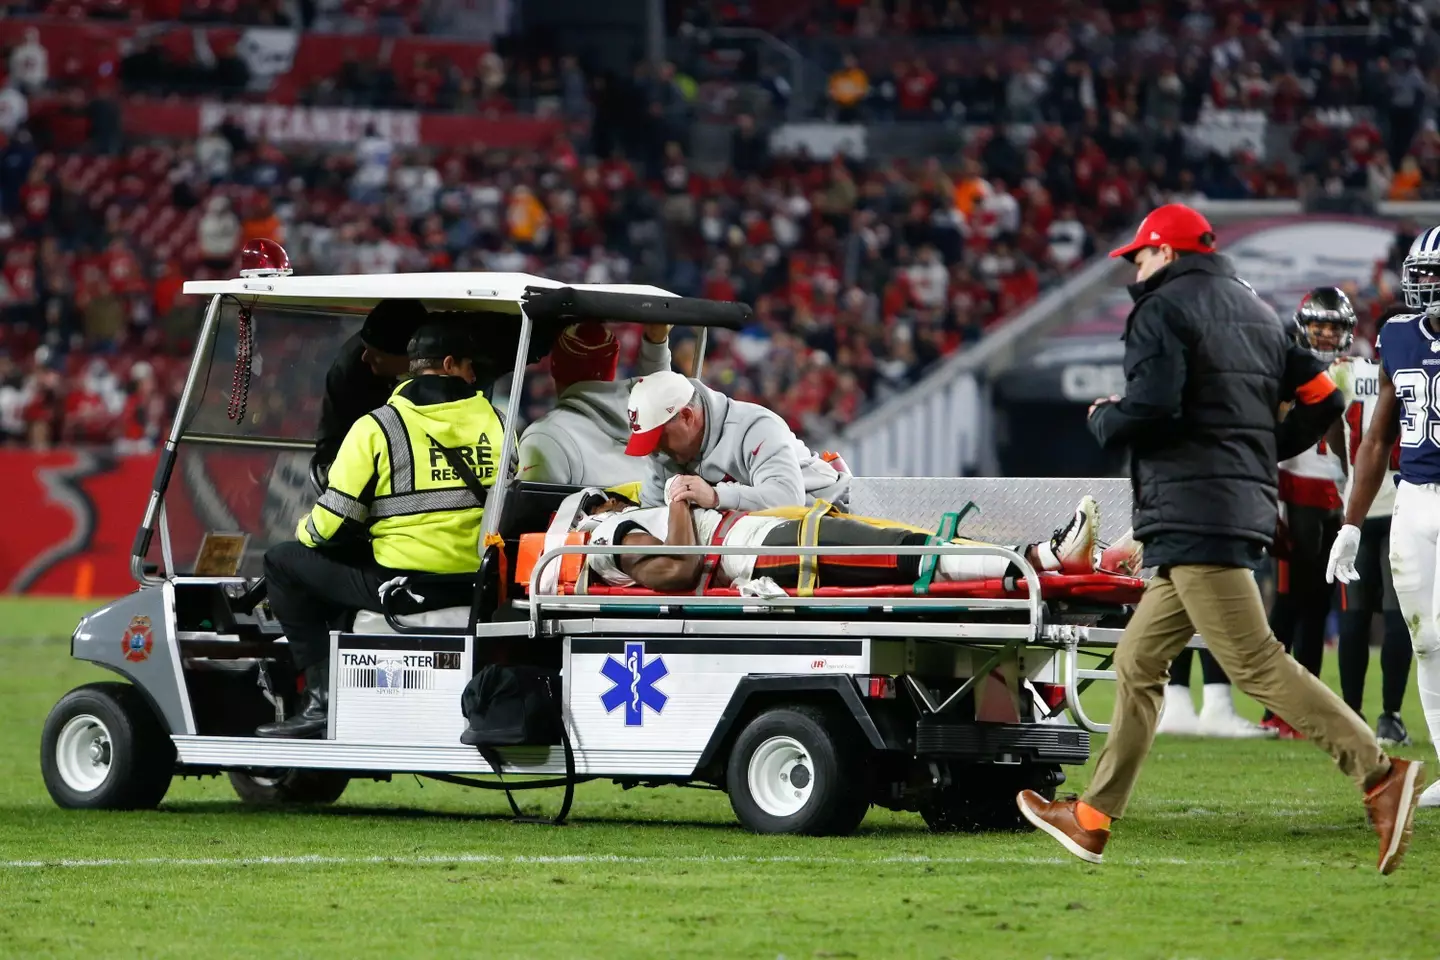 Gage was taken off the field on a stretcher.